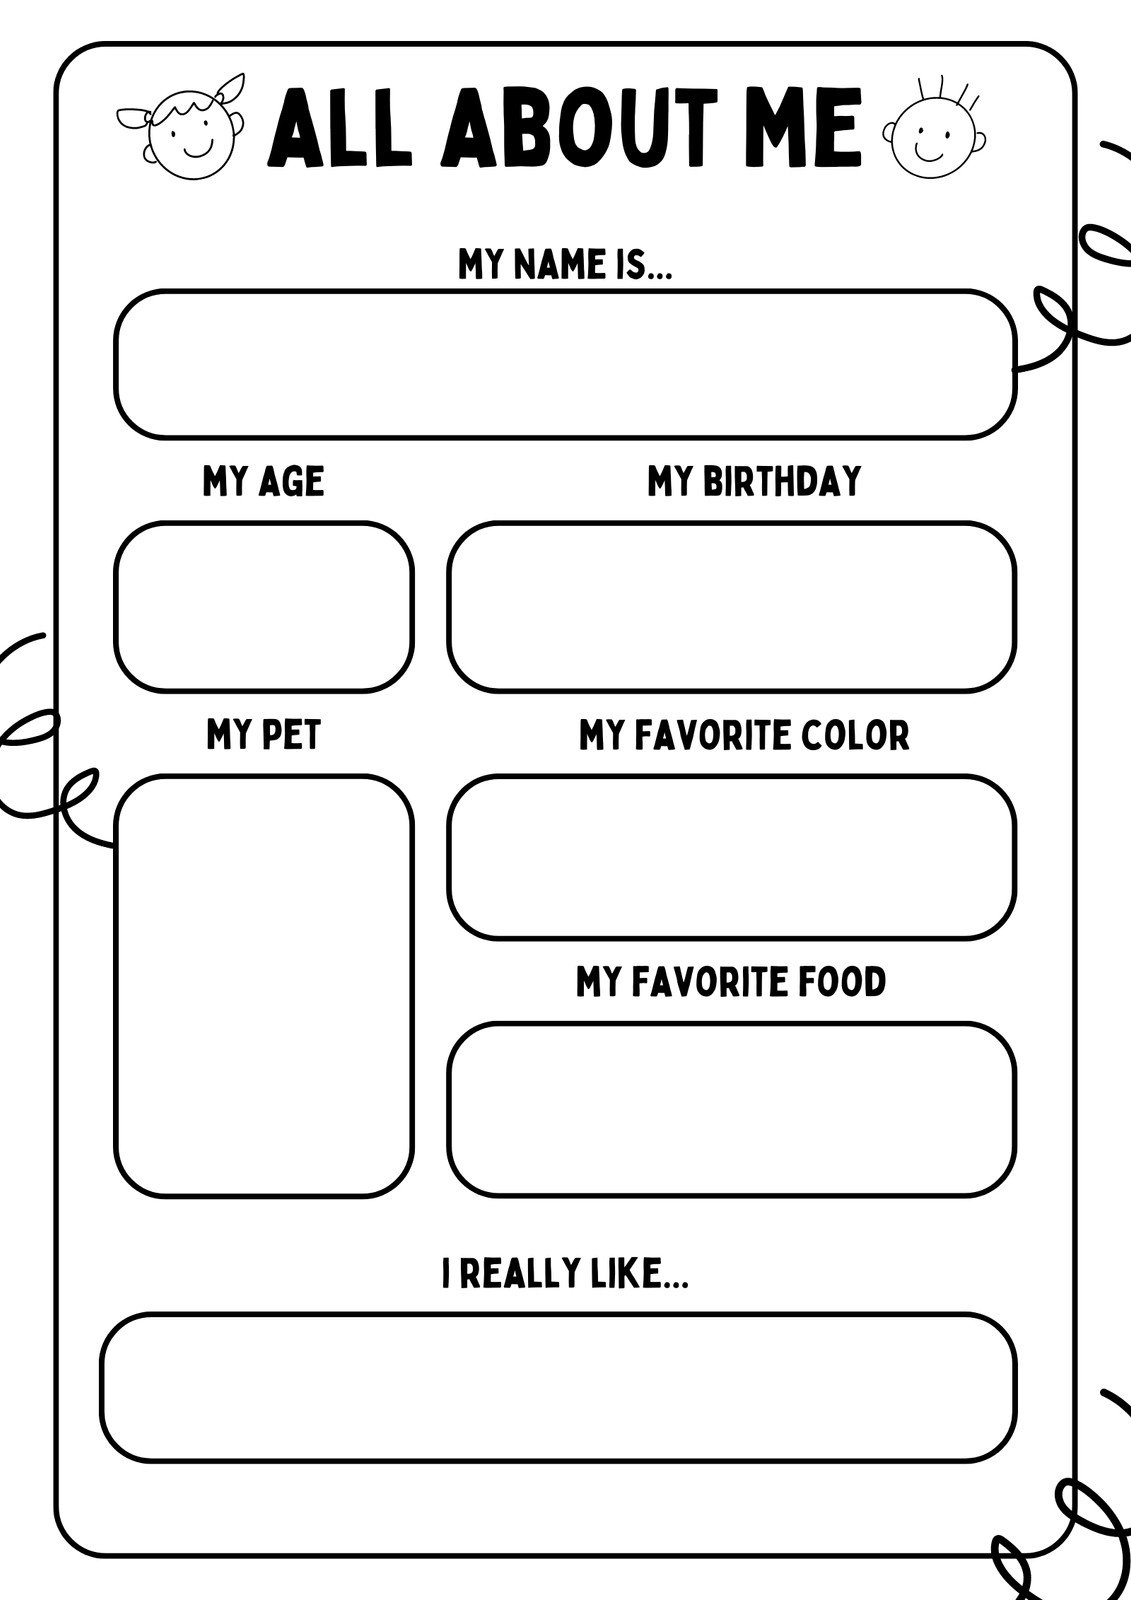 All About Me Free Printable Middle School Printable Templates